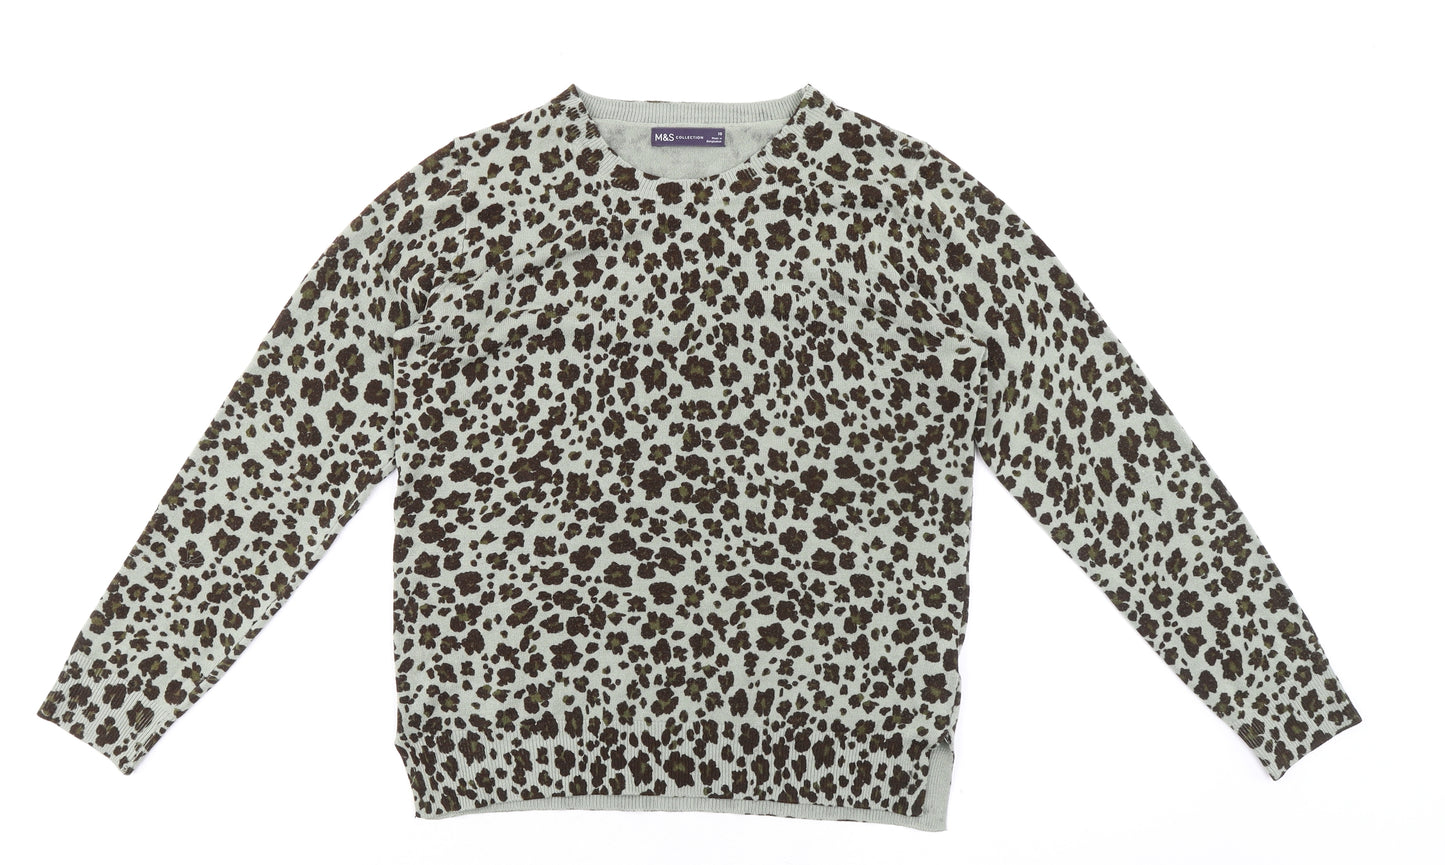 Marks and Spencer Womens Grey Round Neck Animal Print Acrylic Pullover Jumper Size 10 - Leopard Print